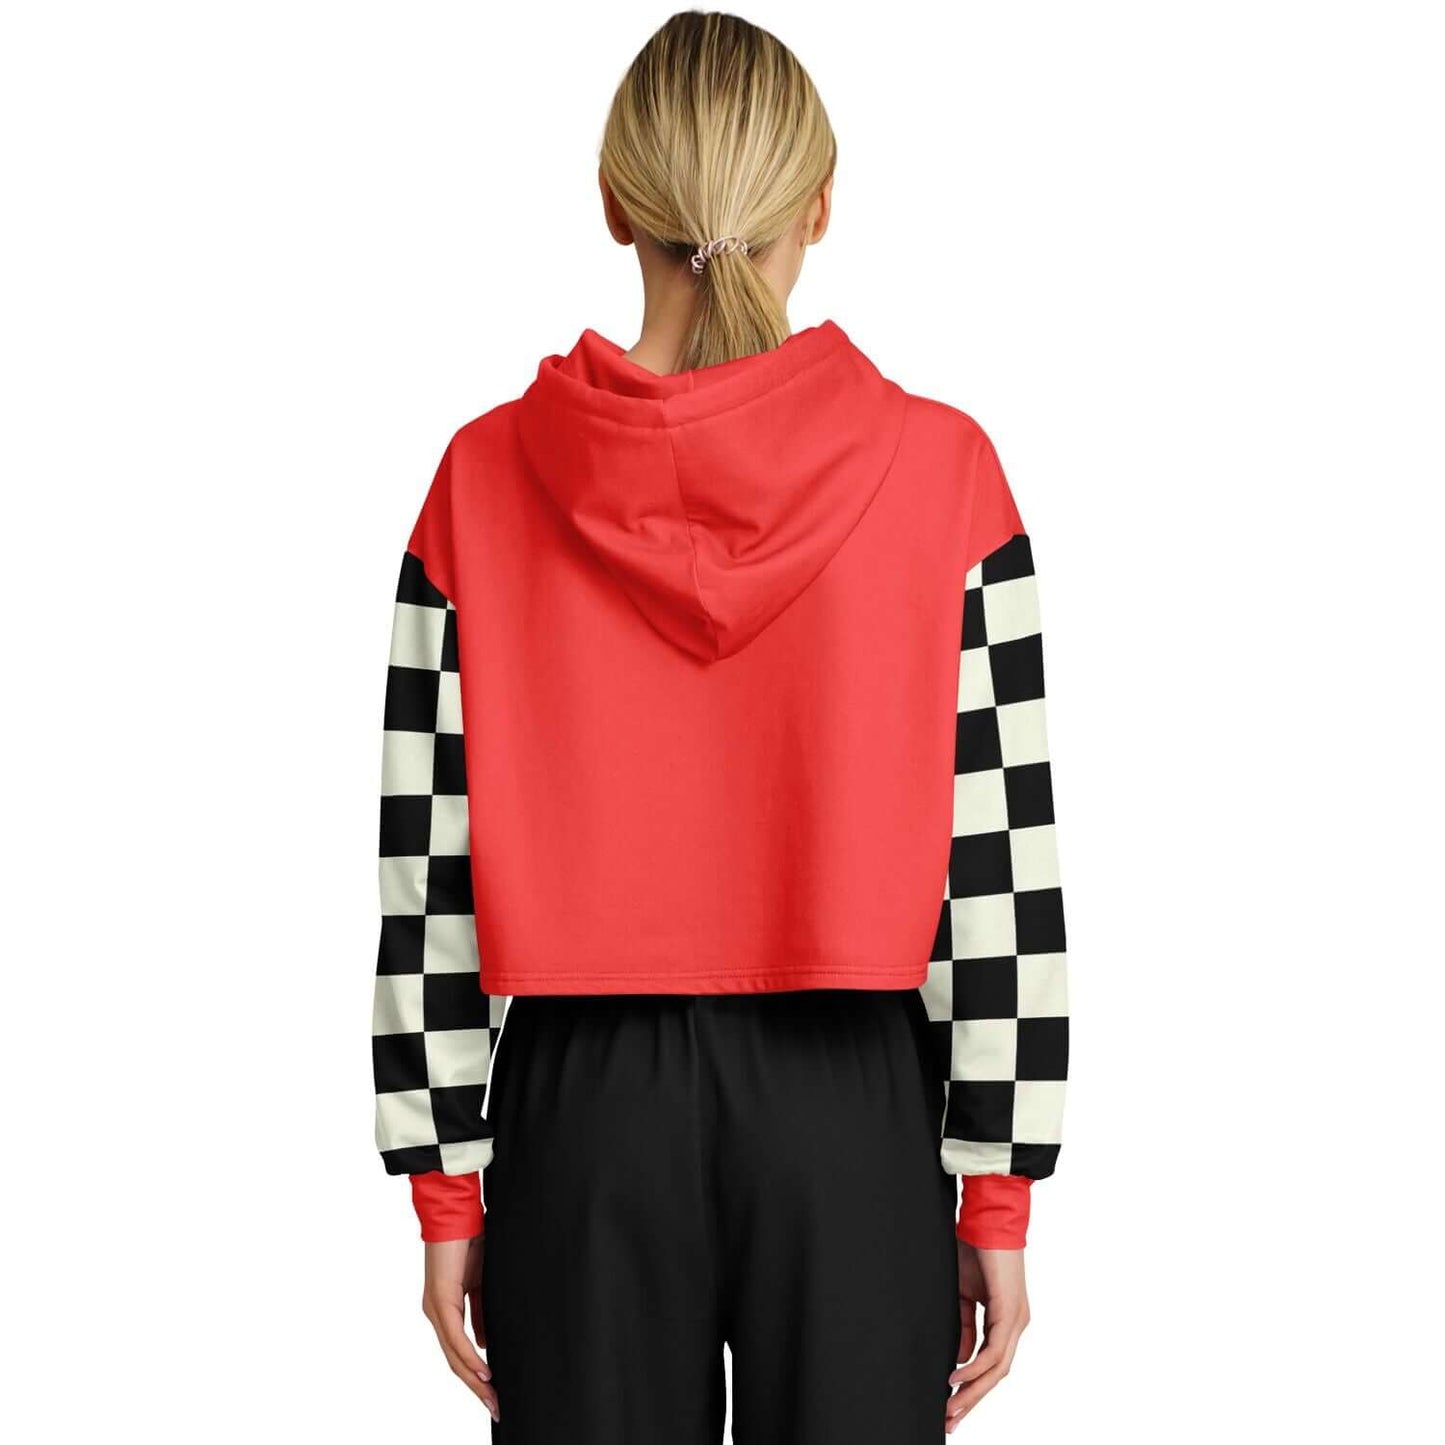 Red Cropped Hoodie | The Race